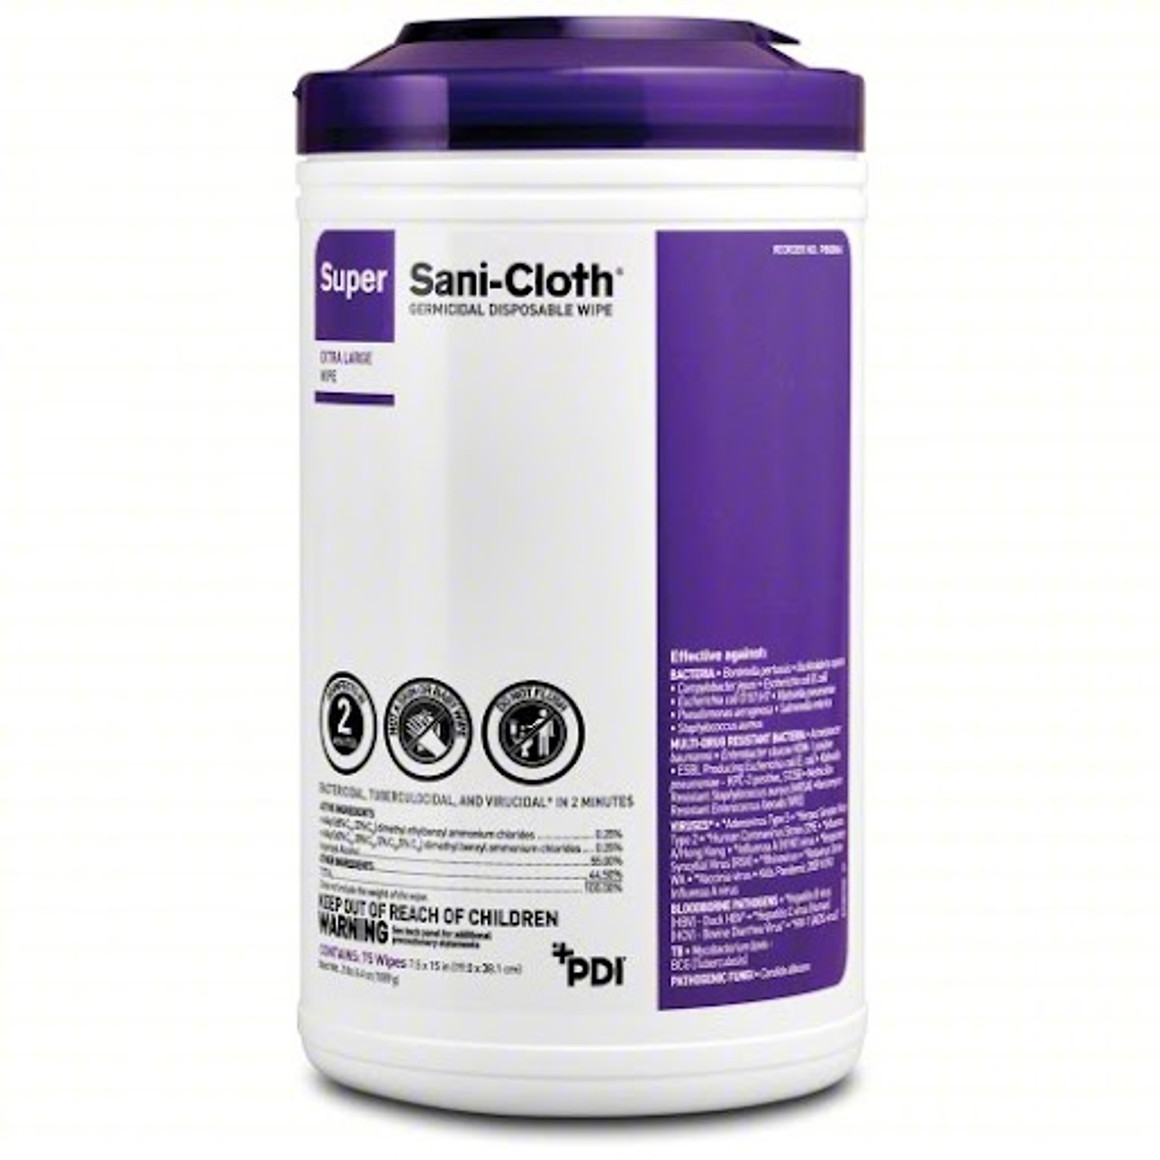 Super Sani-Cloth Germicidal Disinfectant Wipes X-Large 75 / canister